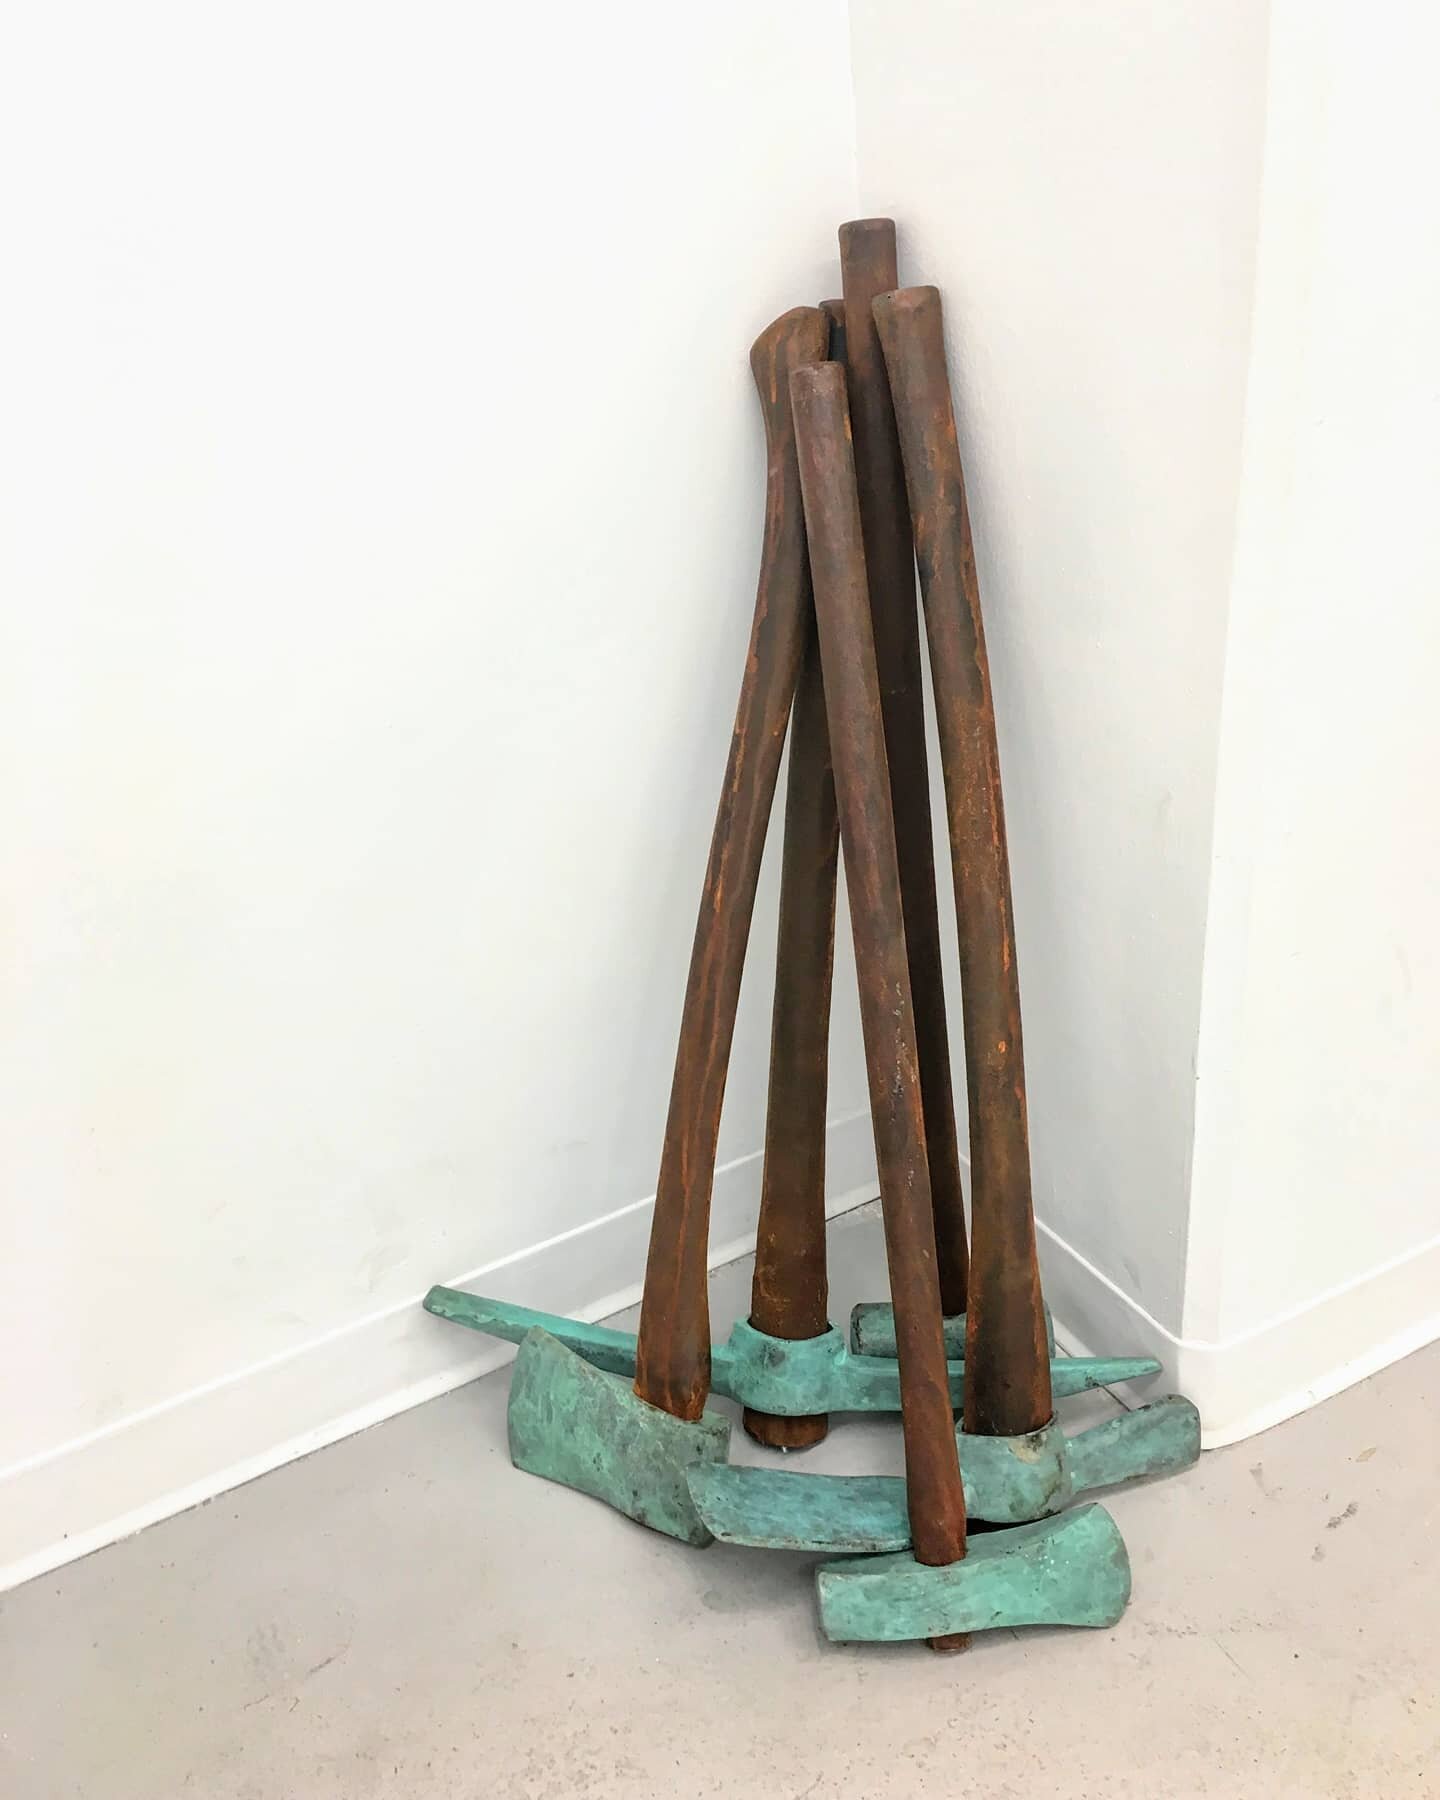 Now open at The Mclean Project for the Arts&nbsp;@mp4a&nbsp;, Sculpture Now 2020 exhibition. Excited to share my piece &ldquo;Remember the Hand&rdquo;&nbsp;with over 50 artist from the &nbsp;@washingtonsculptors&nbsp;up till November 14, 2020) curate